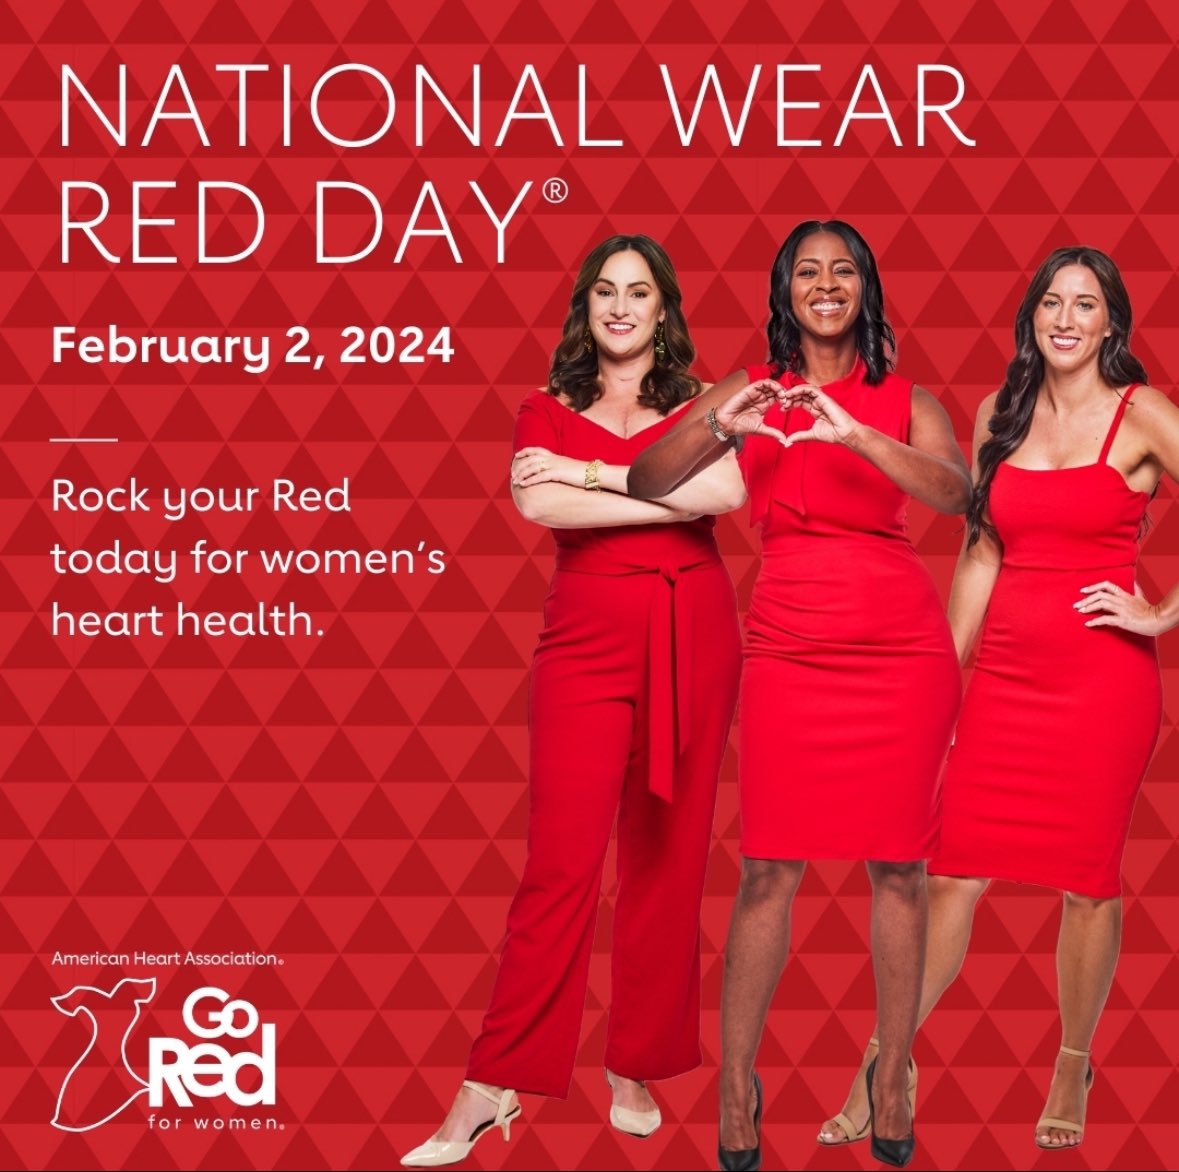 Timely for @GoRedForWomen day ❤️ raising awareness of CVD in women, I am so proud to 📣 our 📝 in press on Ischemic HD and ACS management in 🤰 🔗➡️ ajogmfm.org/article/S2589-… #CardioOB #SCAD #PAMI @GarimaVSharmaMD @JamieLWKennedy @AHAScience @InovaHealth @ISHVnews @InovaCVfellows